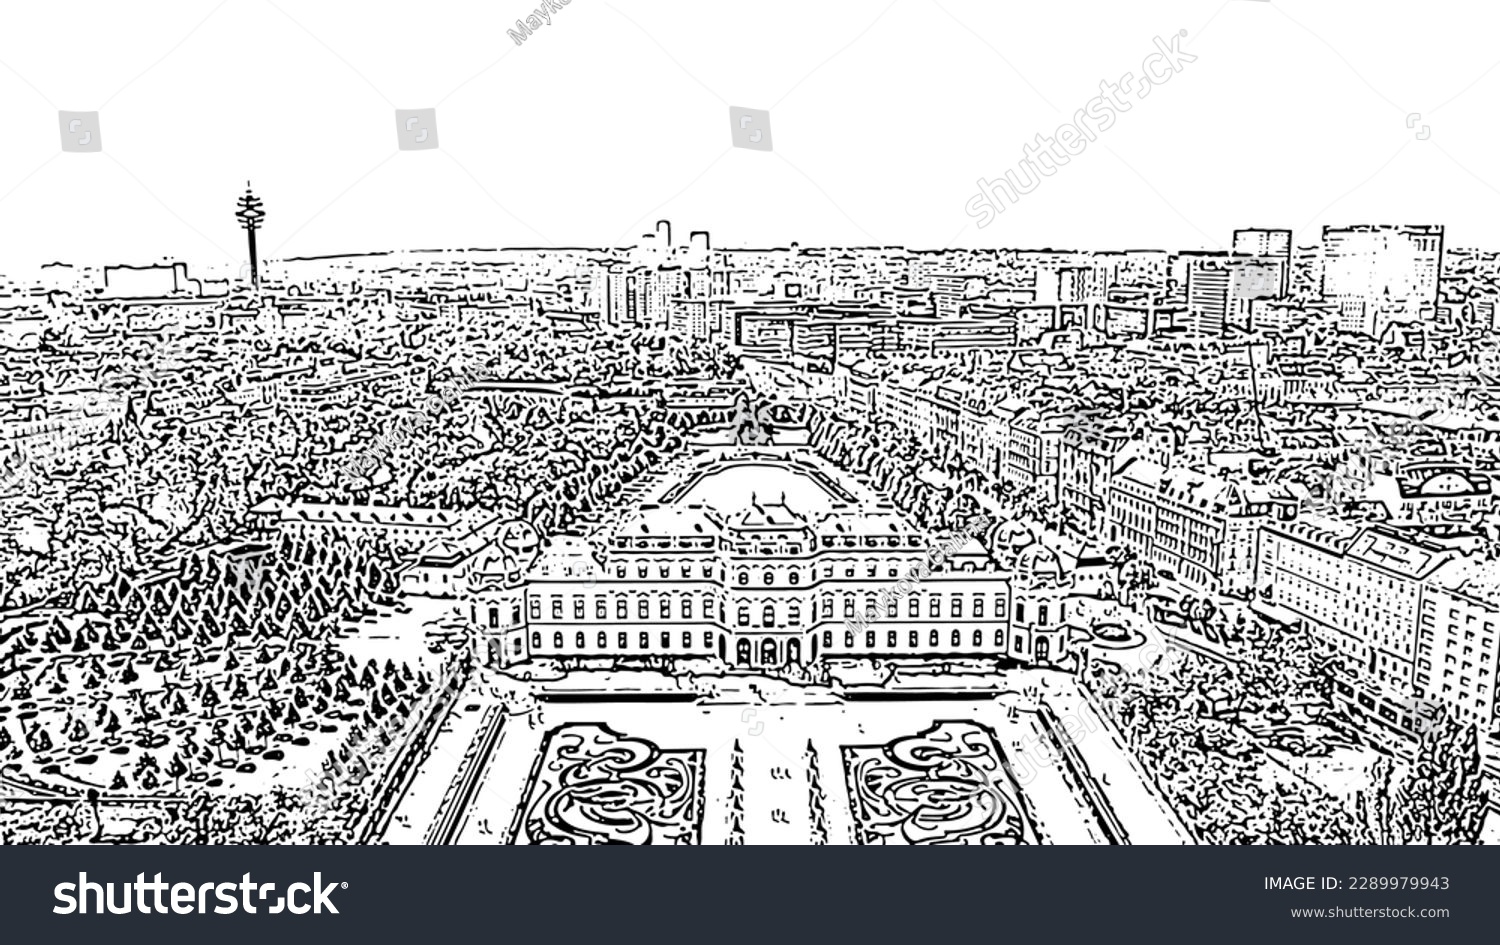 SVG of Sketch doodle style. Vienna, Austria. Baroque palace complex in Vienna. Built by Lucas von Hildebrandt at the beginning of the 18th century, Aerial View   svg